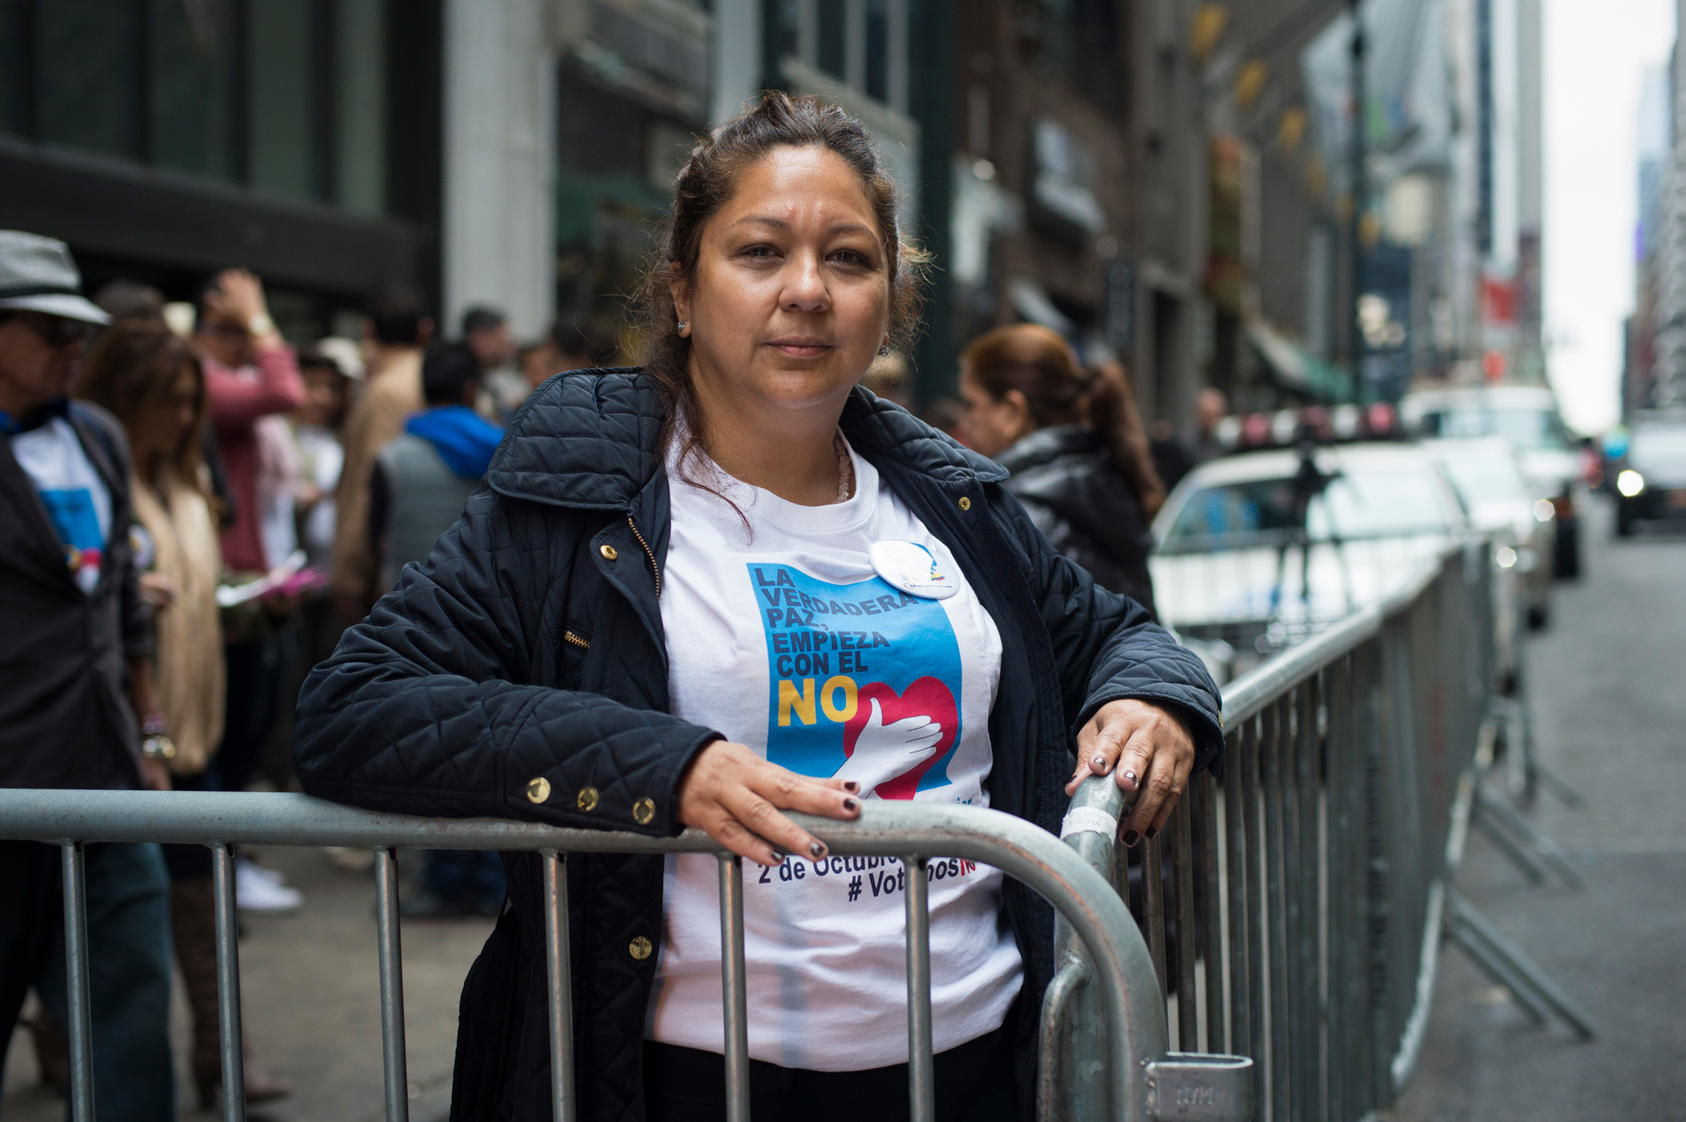 A nurse originally from Barrancabermeja, Colombia, who voted no on the FARC peace accord referendum, in New York, Oct. 2, 2016. Colombians in and around New York City voted in a referendum on a peace accord between the Colombian government and the country’s largest rebel group, the Revolutionary Armed Forces of Colombia. The deal was narrowly rejected by voters (Jonah Markowitz/The New York Times)